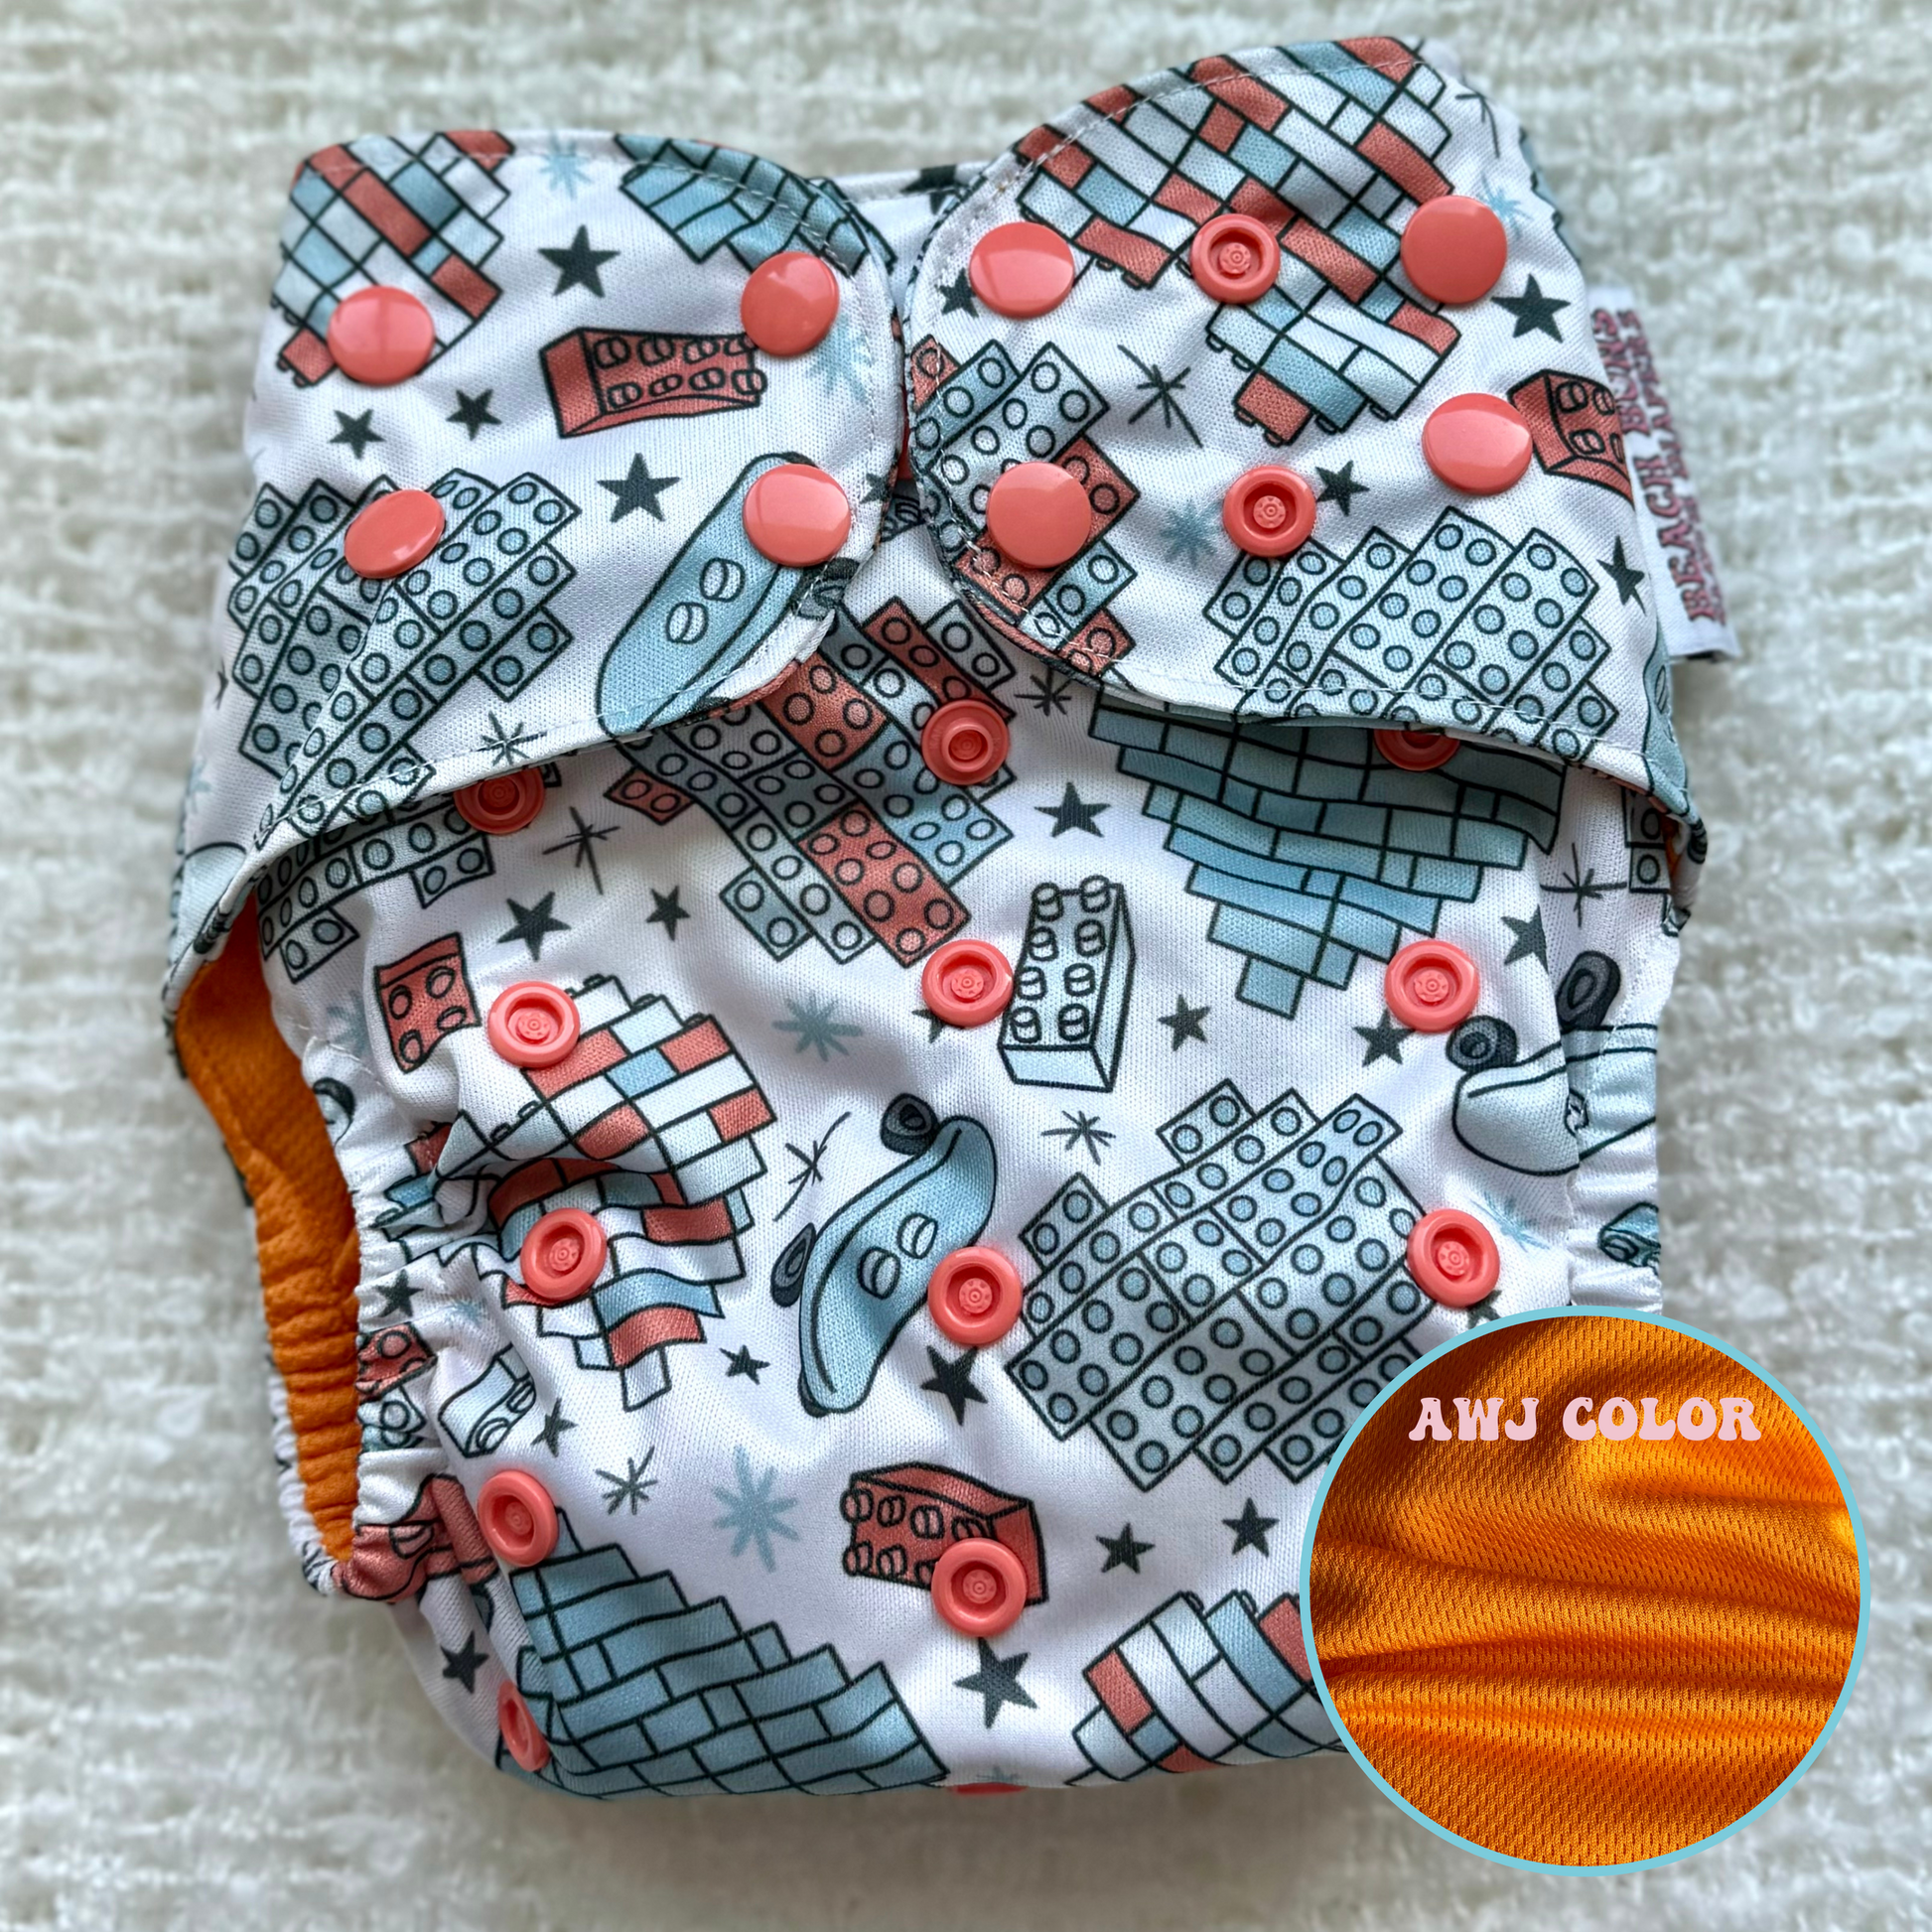 An assortment of colorful cloth diapers neatly stacked, showcasing a sustainable and eco-friendly diapering option for babies. The diapers display various vibrant patterns and soft fabrics, providing a reusable and comfortable solution for families.